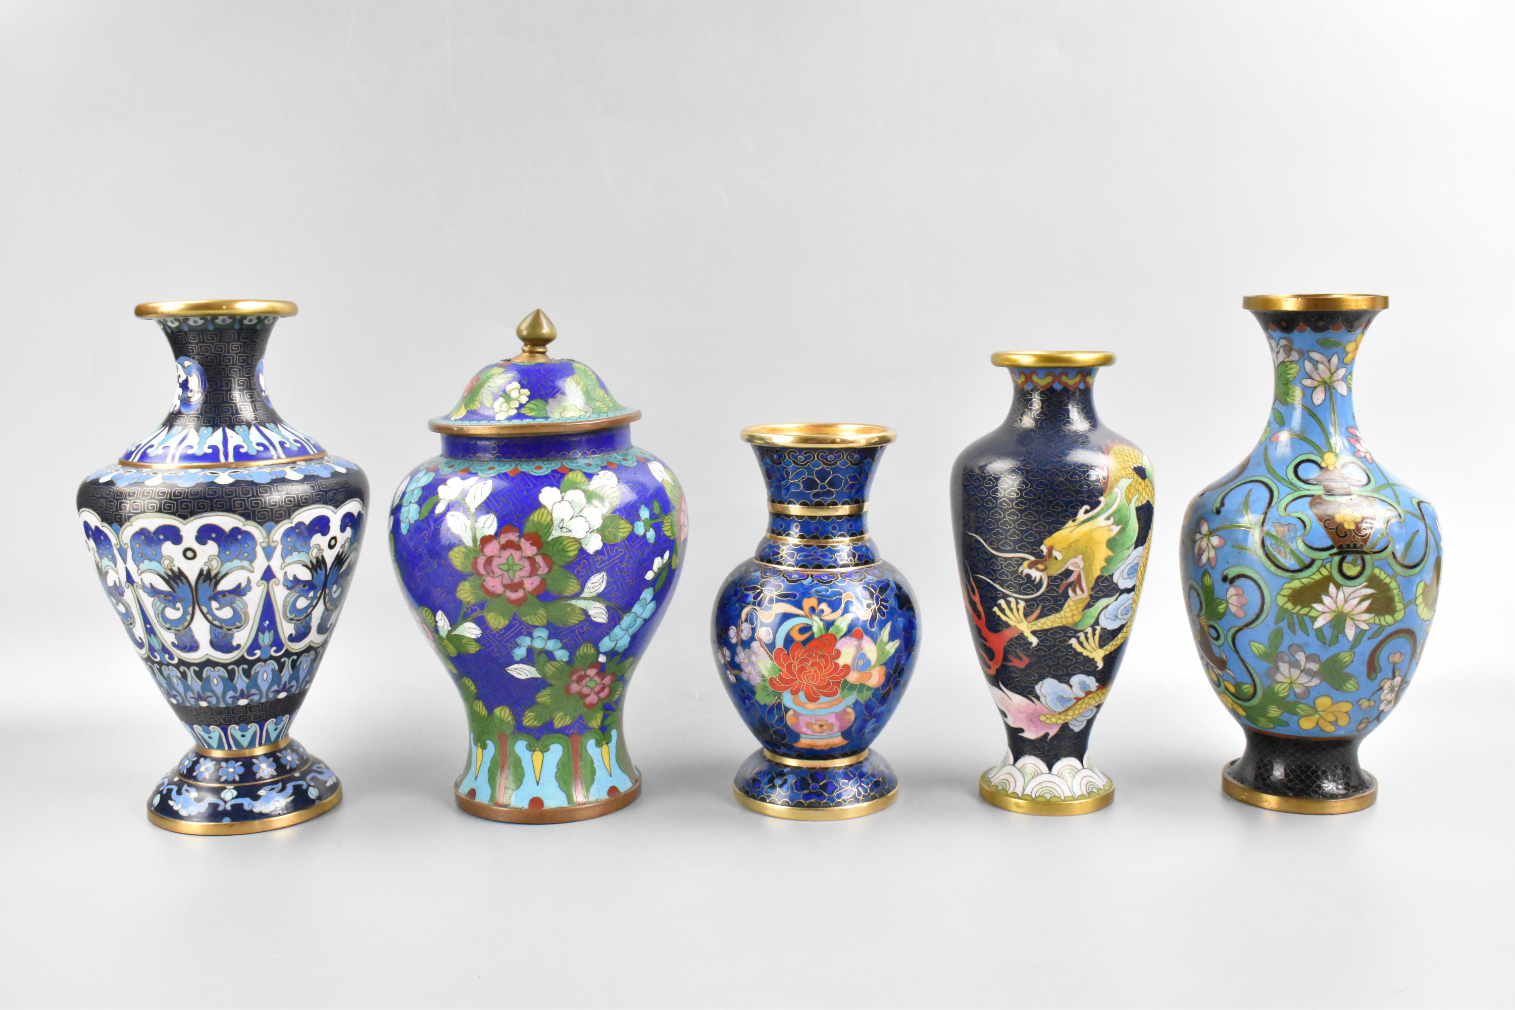 GROUP OF 5 CHINESE CLOISONNE VASES  301a73